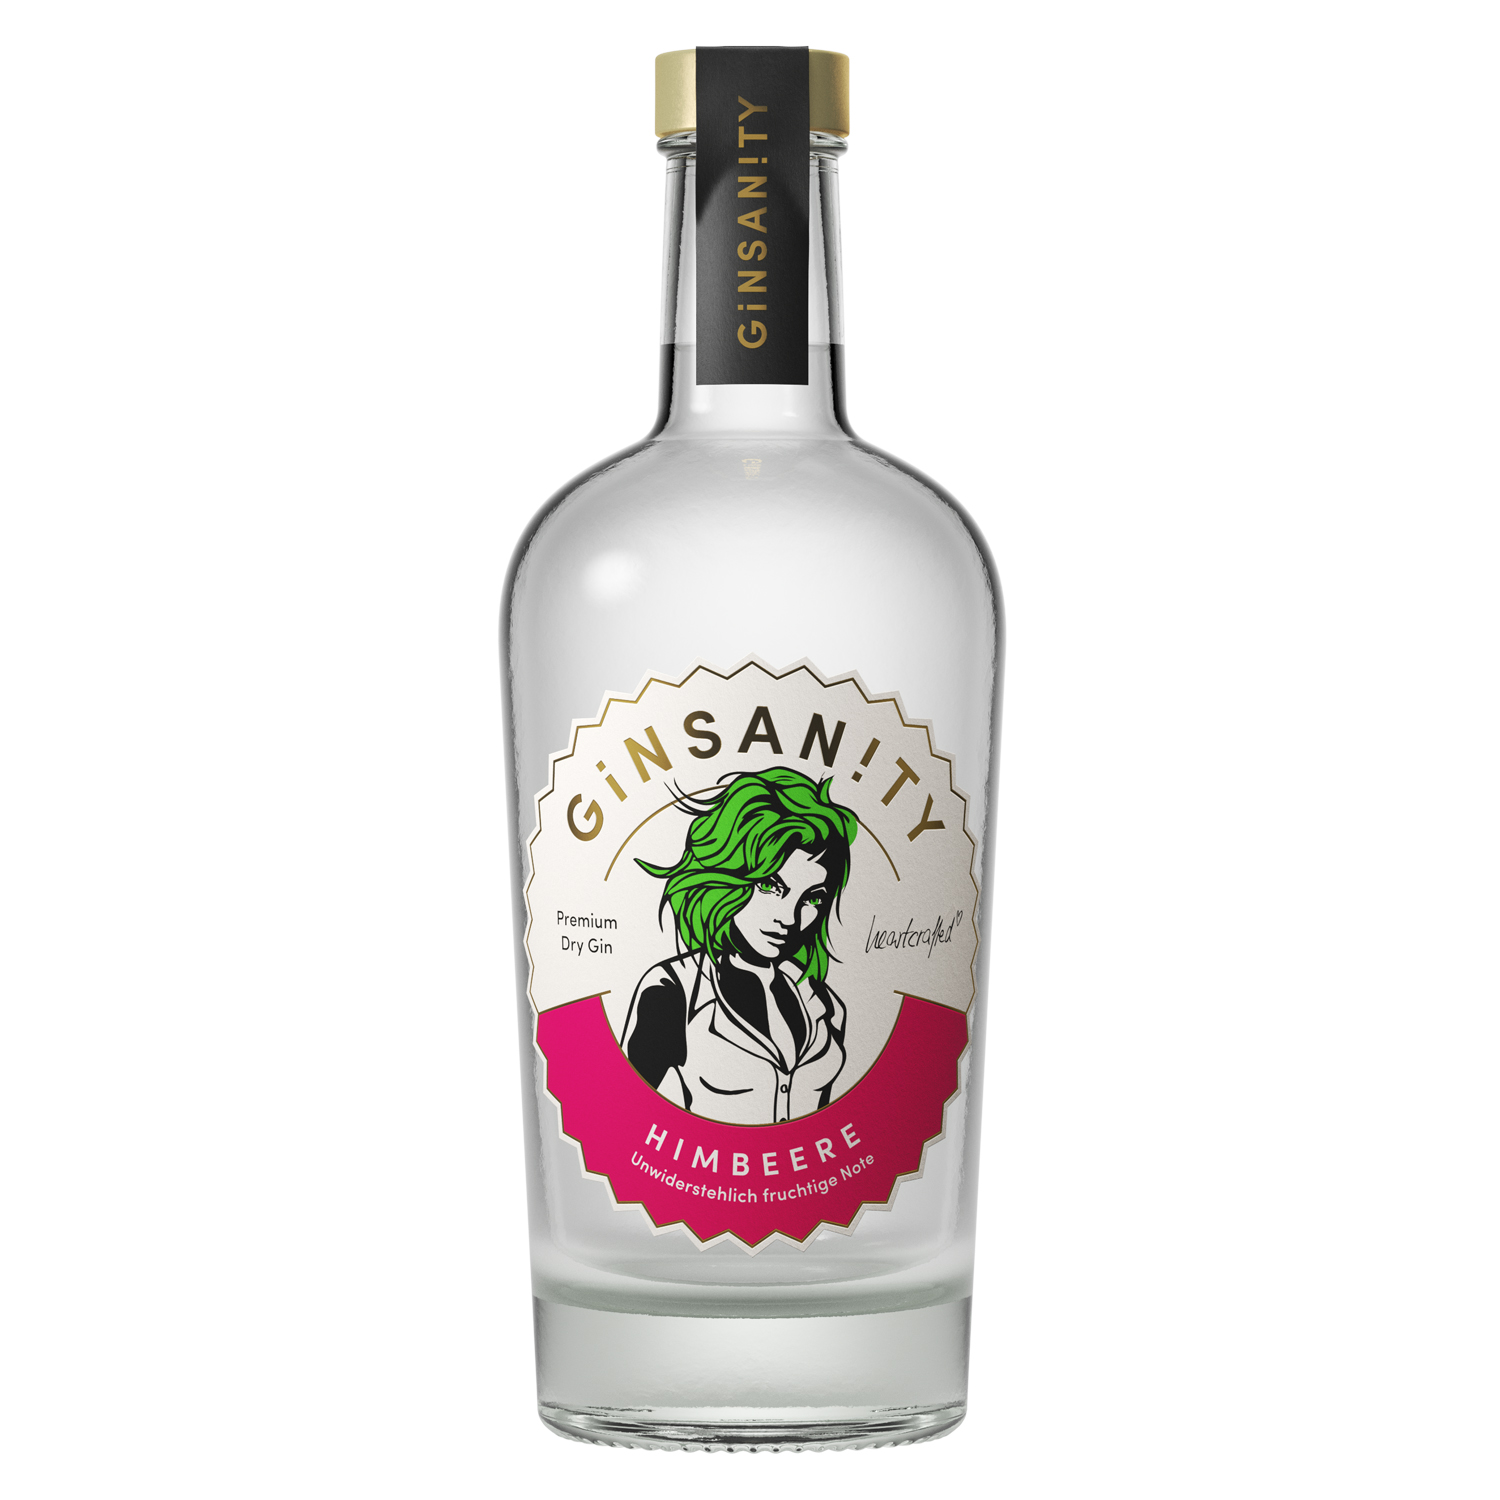 Ginsanity Himbeere Premium Dry Gin / 42,5% Vol. 0,5 ltr.